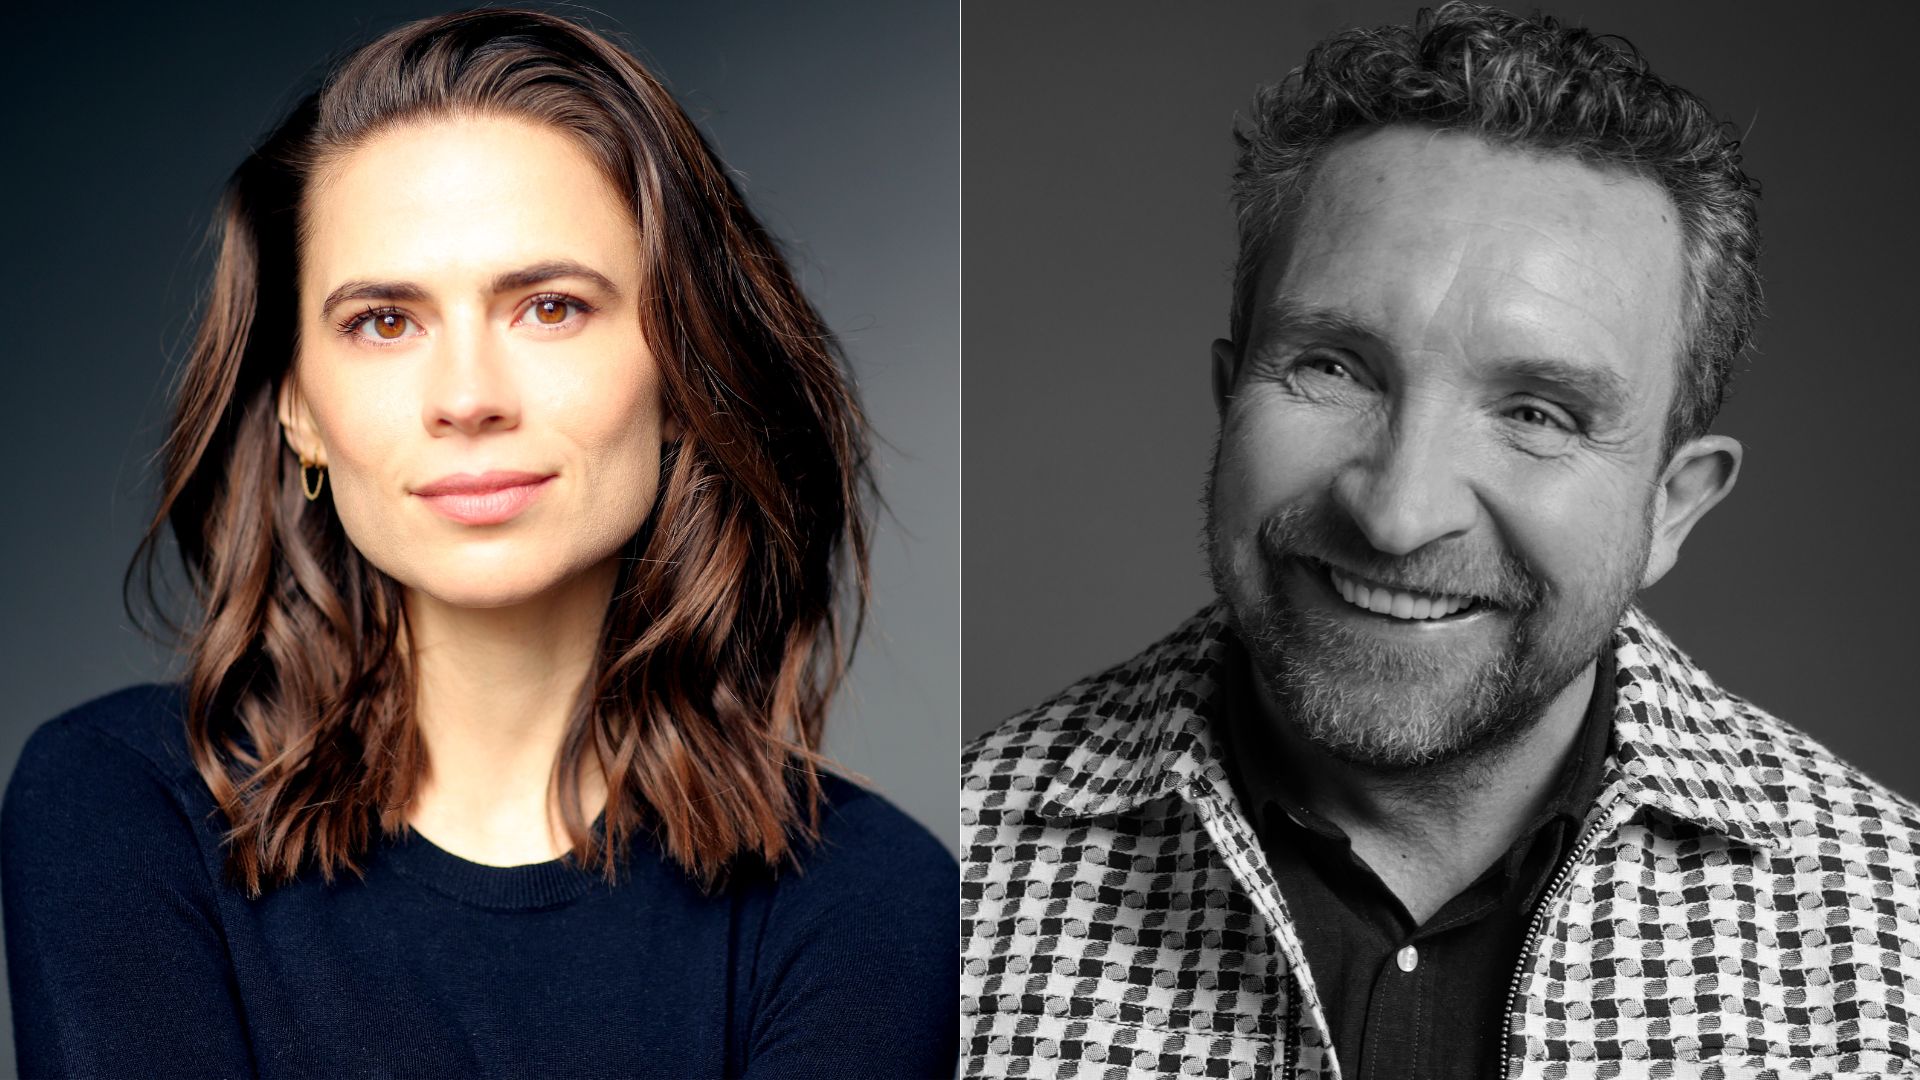 Hayley Atwell (Captain America: The First Avenger) and Eddie Marsan (Ray Donovan) will also be in the new episodes of Heartstopper (Photo: Disclosure/Faye Thomas/Greg Williams)